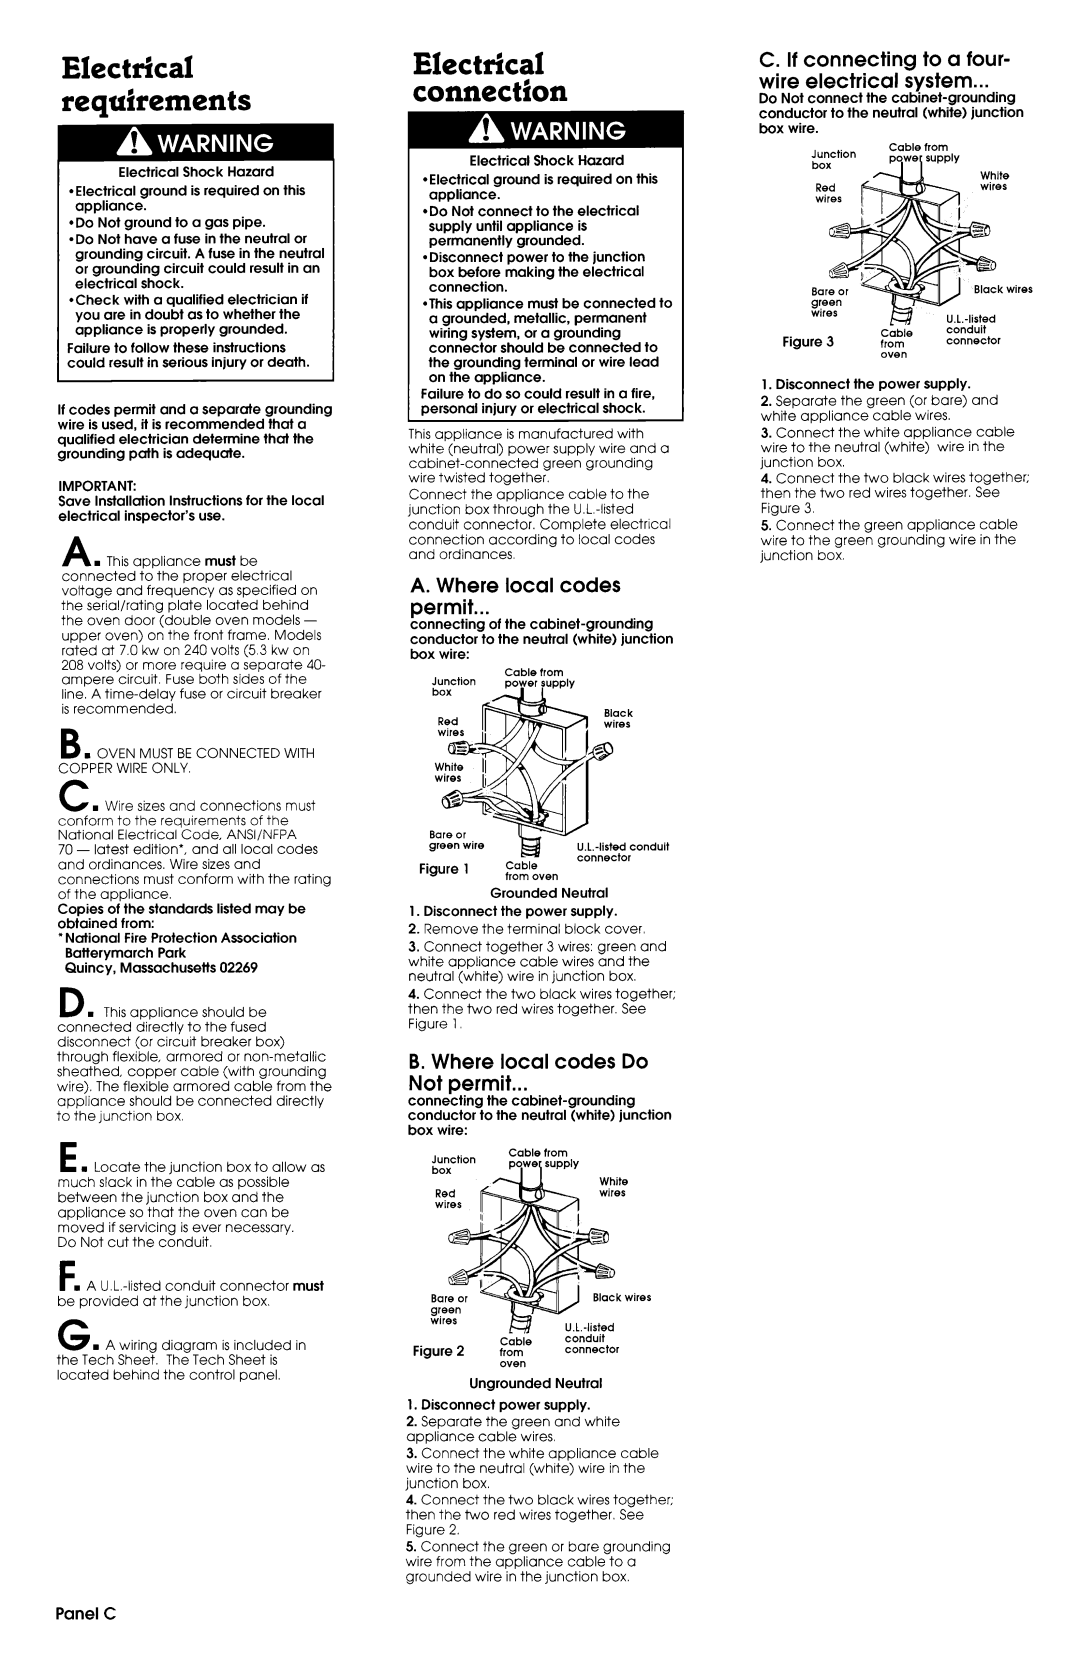 Maytag 3183636 Panel C, Electrical requirements, Electrical connection, A. Where local codes permit 